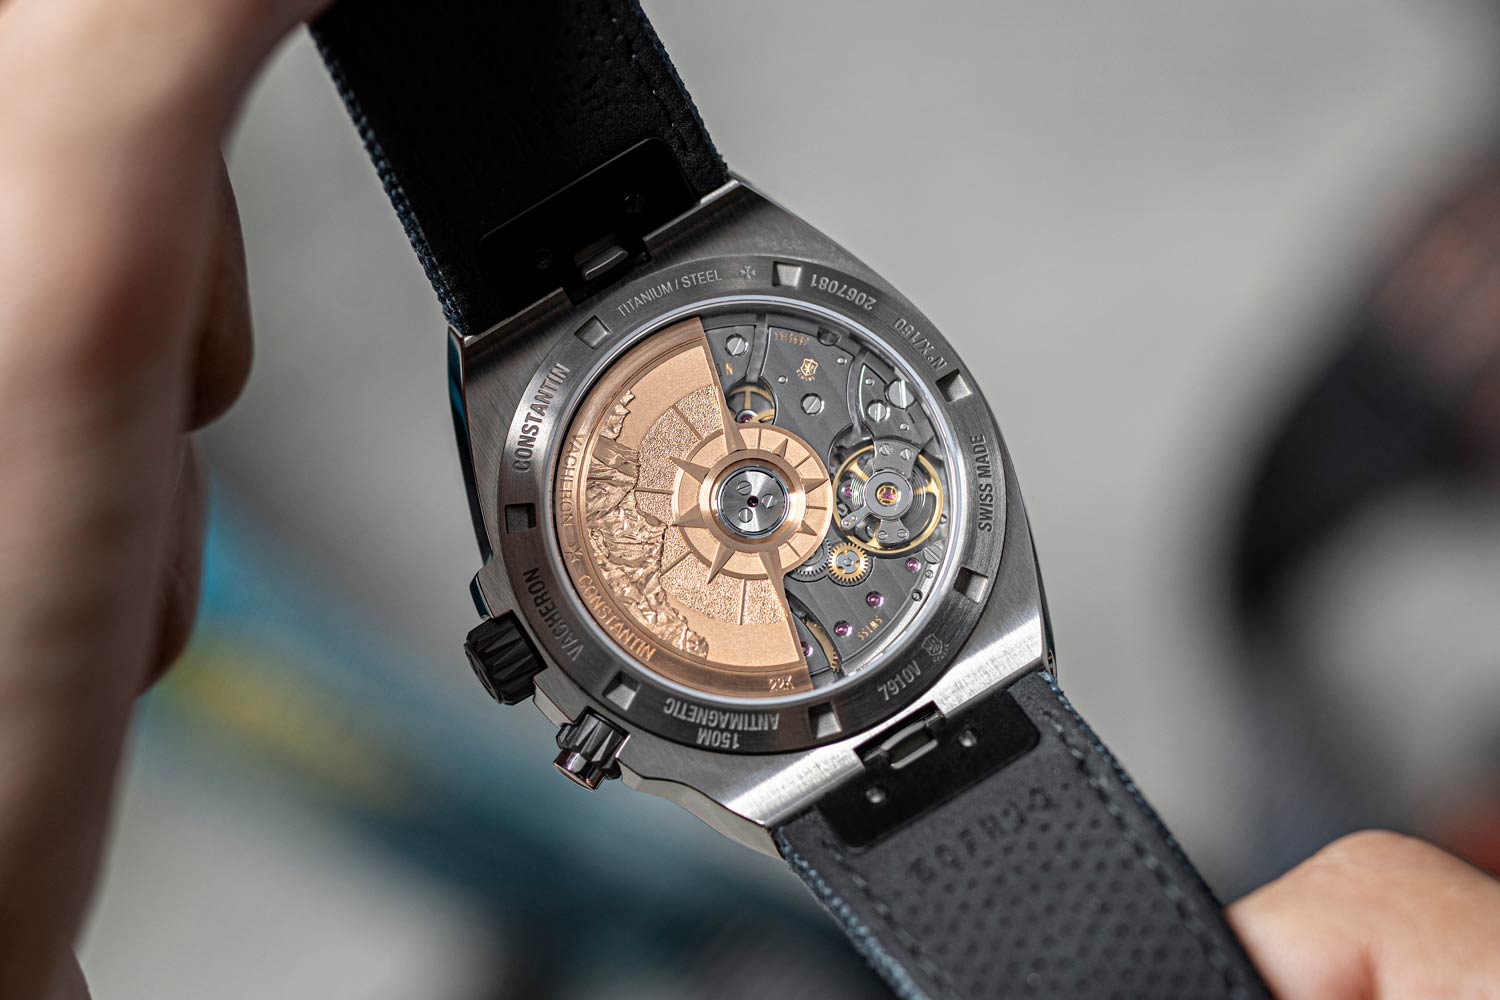 The Overseas 'Everest' Dual Time is powered by Calibre 5110 DT/2 that delivers 60 hours of power reserve (© Revolution)